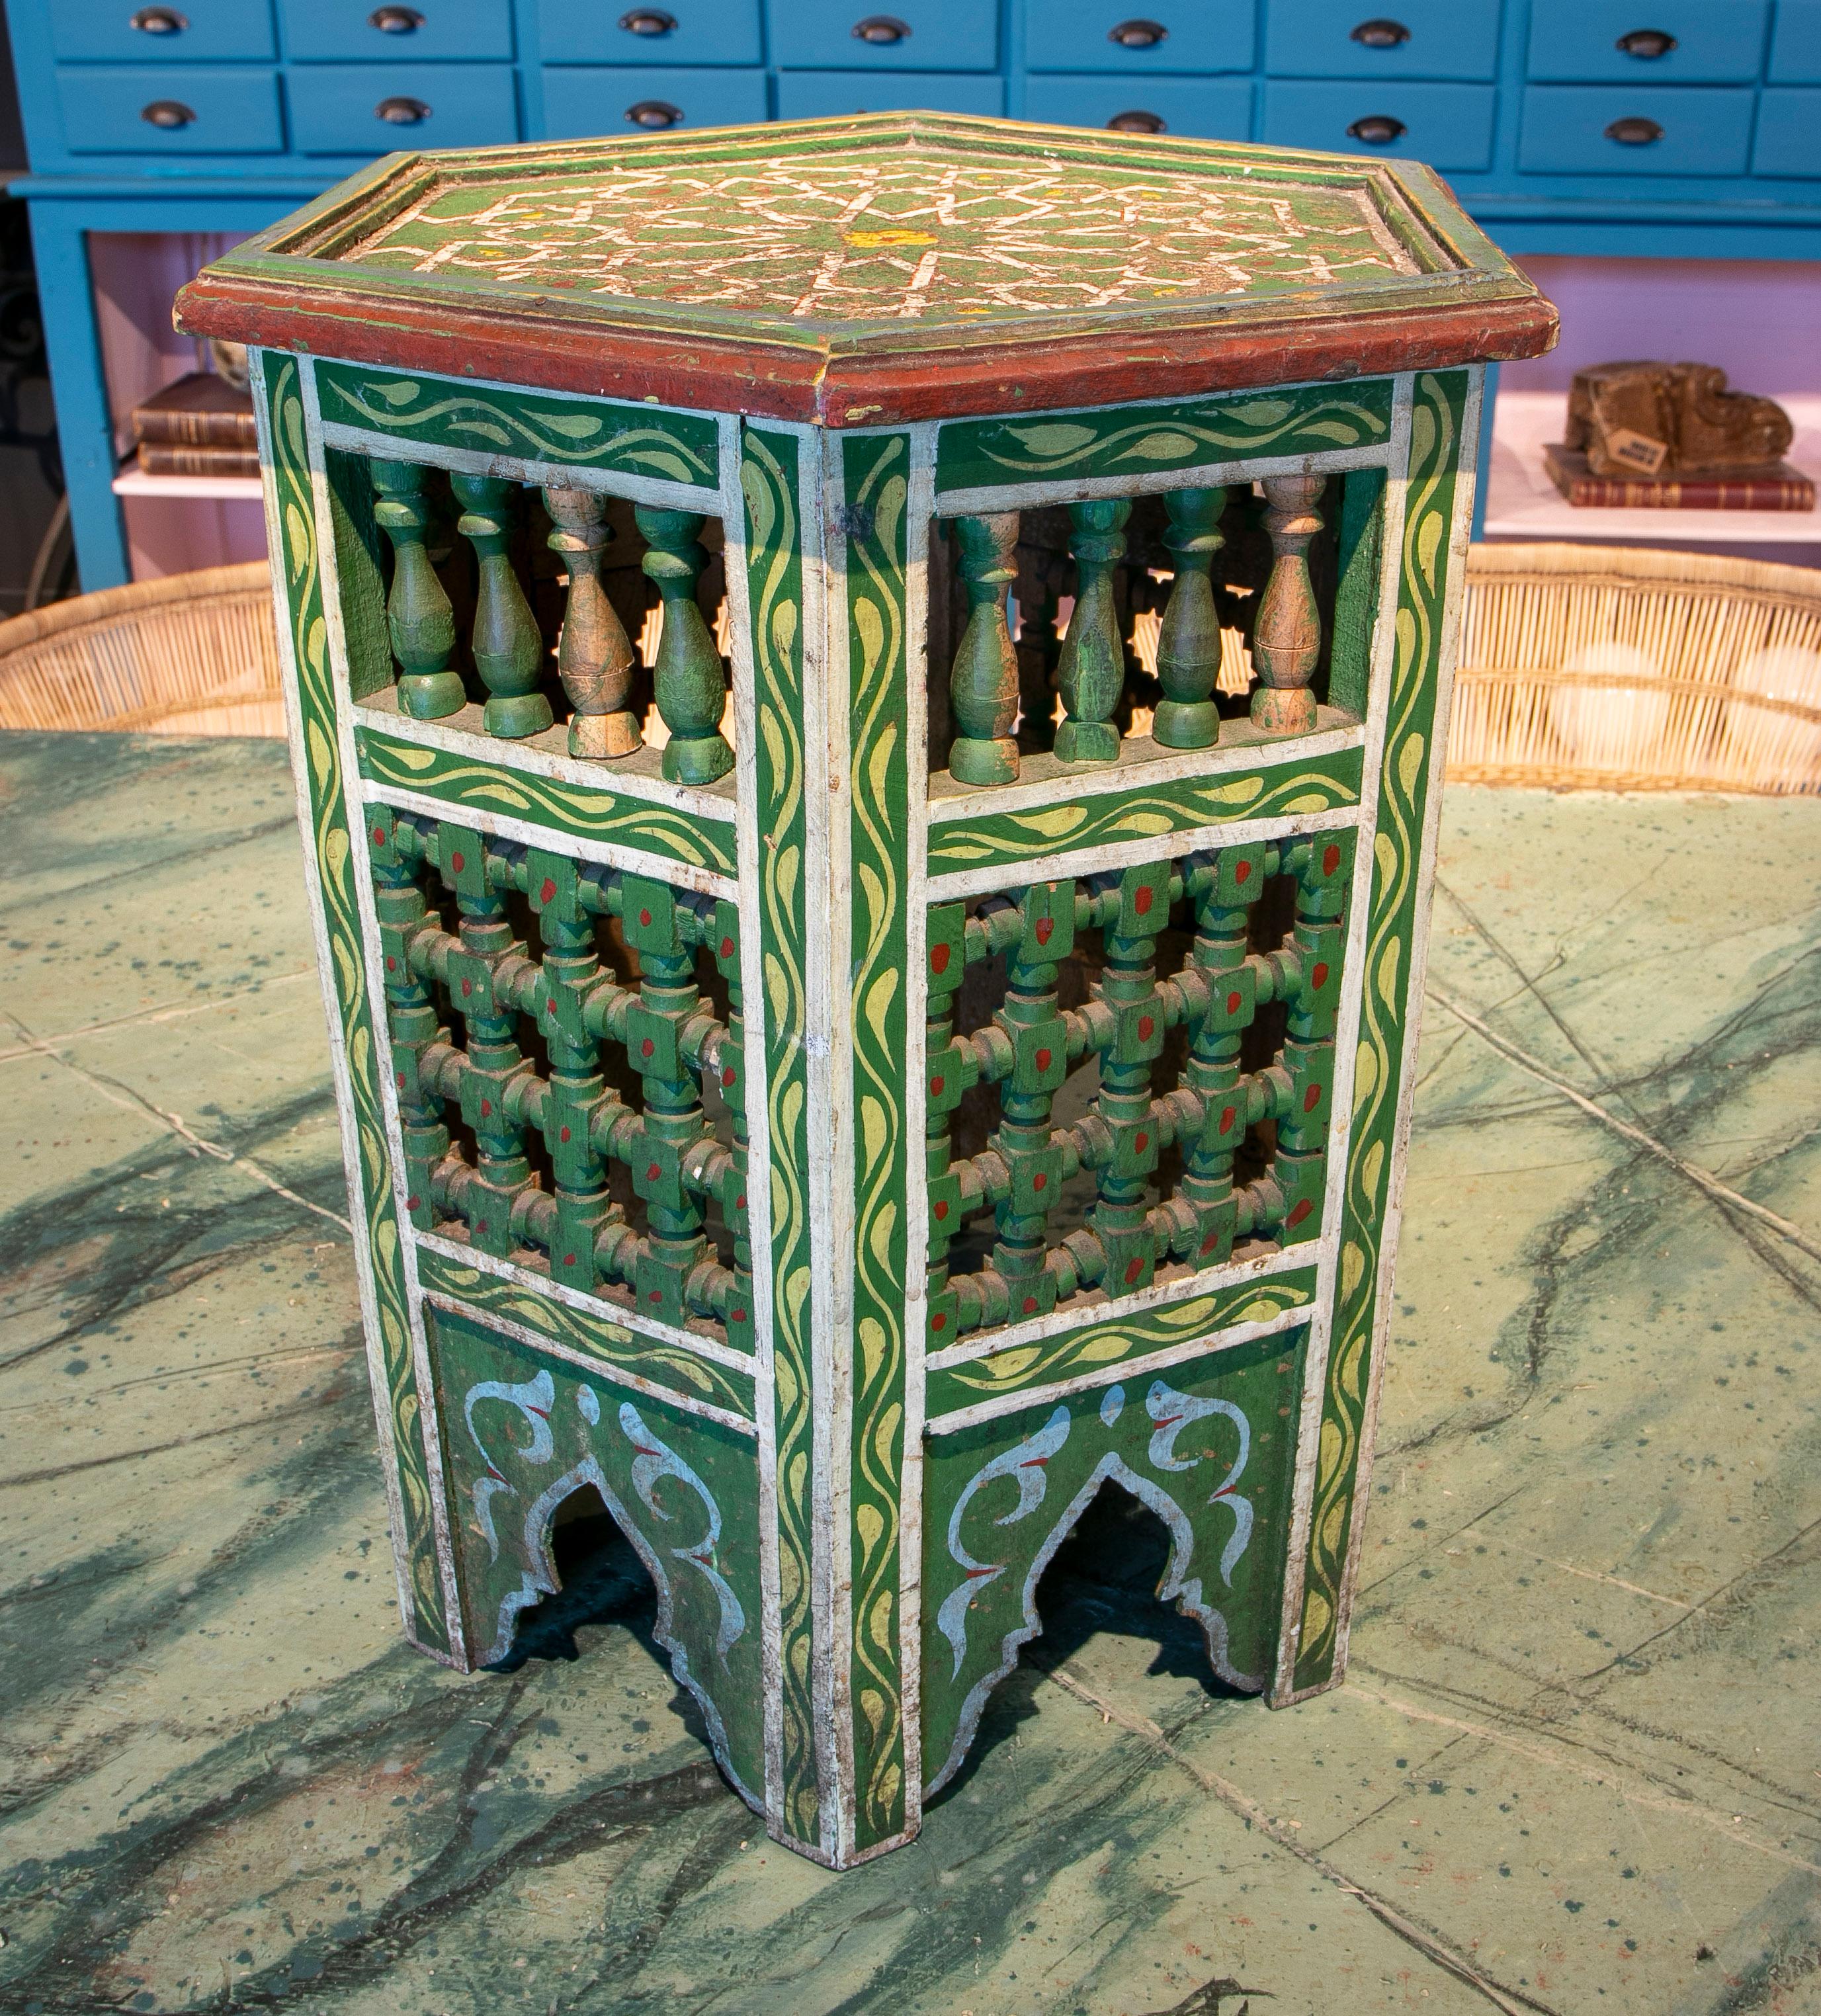 Vintage 1970s Moroccan hand-painted green hexagonal wooden pedestal table with floral and geometric designs in traditional Mediterranean colours, decorated with wooden spindles, Moucharabie fretwork and arches on the base.

African folk Art